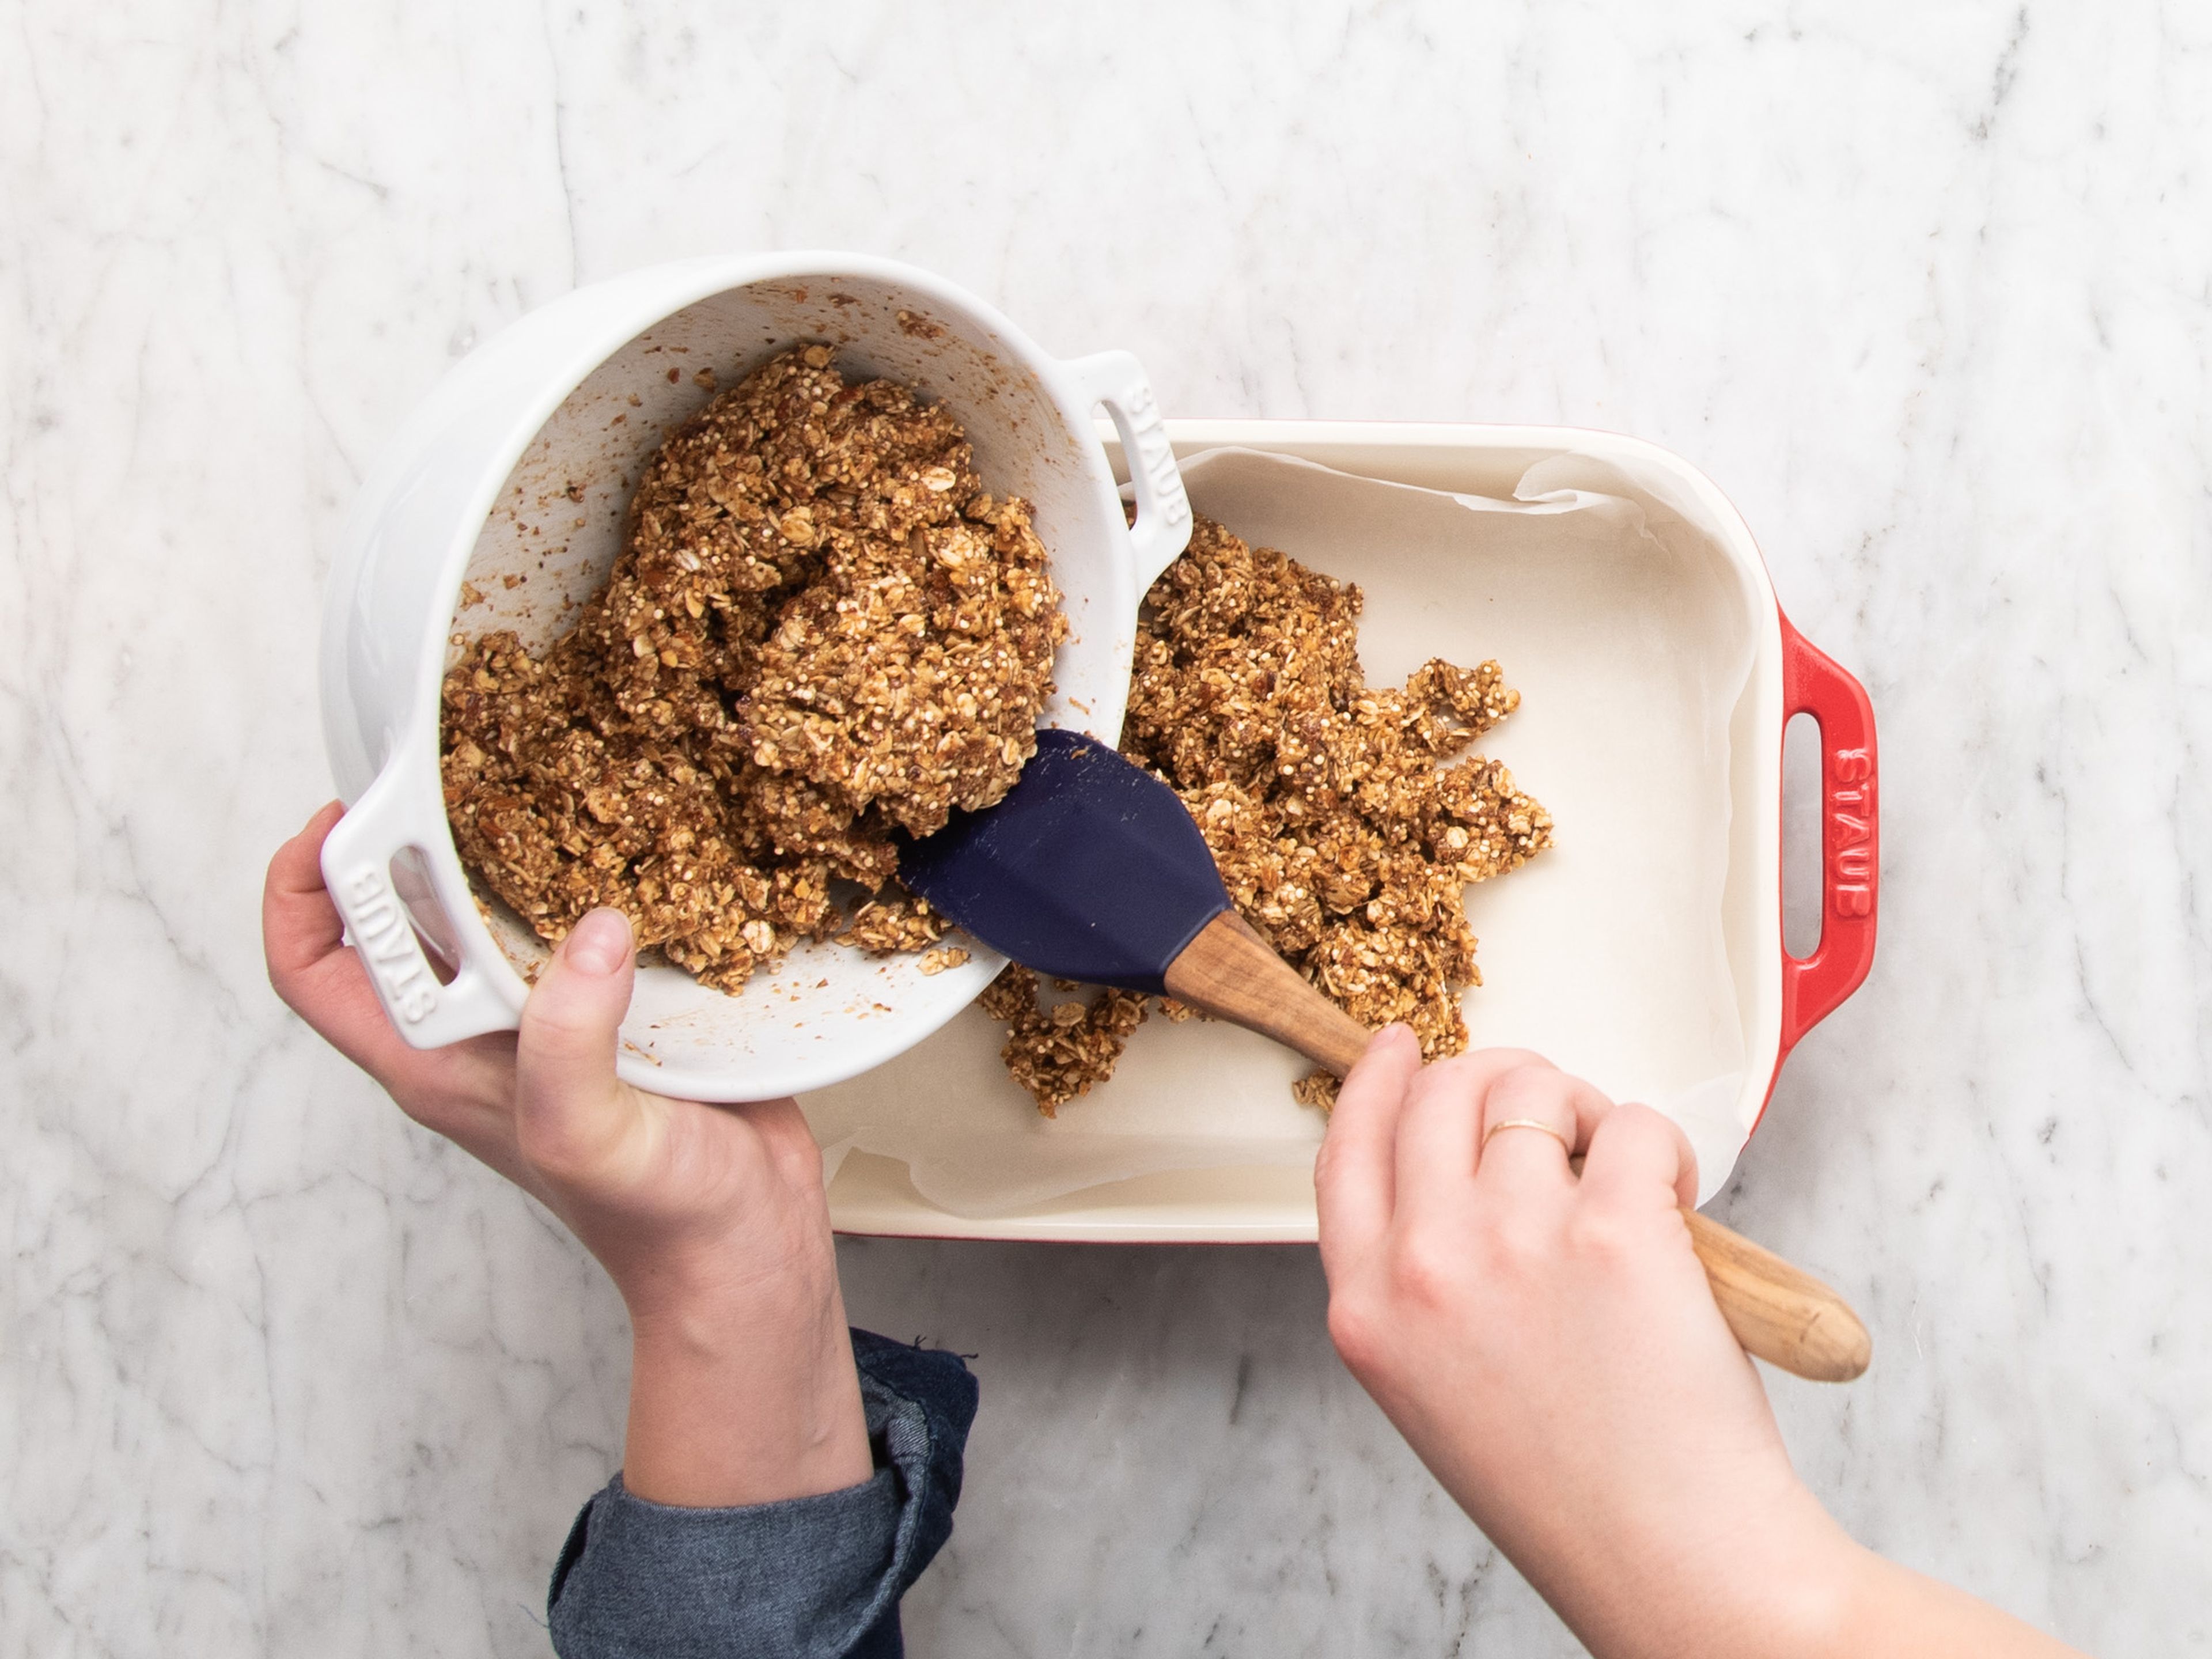 Transfer the mixture to a parchment-lined baking dish, press down firmly, and smooth out. Refrigerate for approx. 1 hr., or until the energy bars have firmed up.